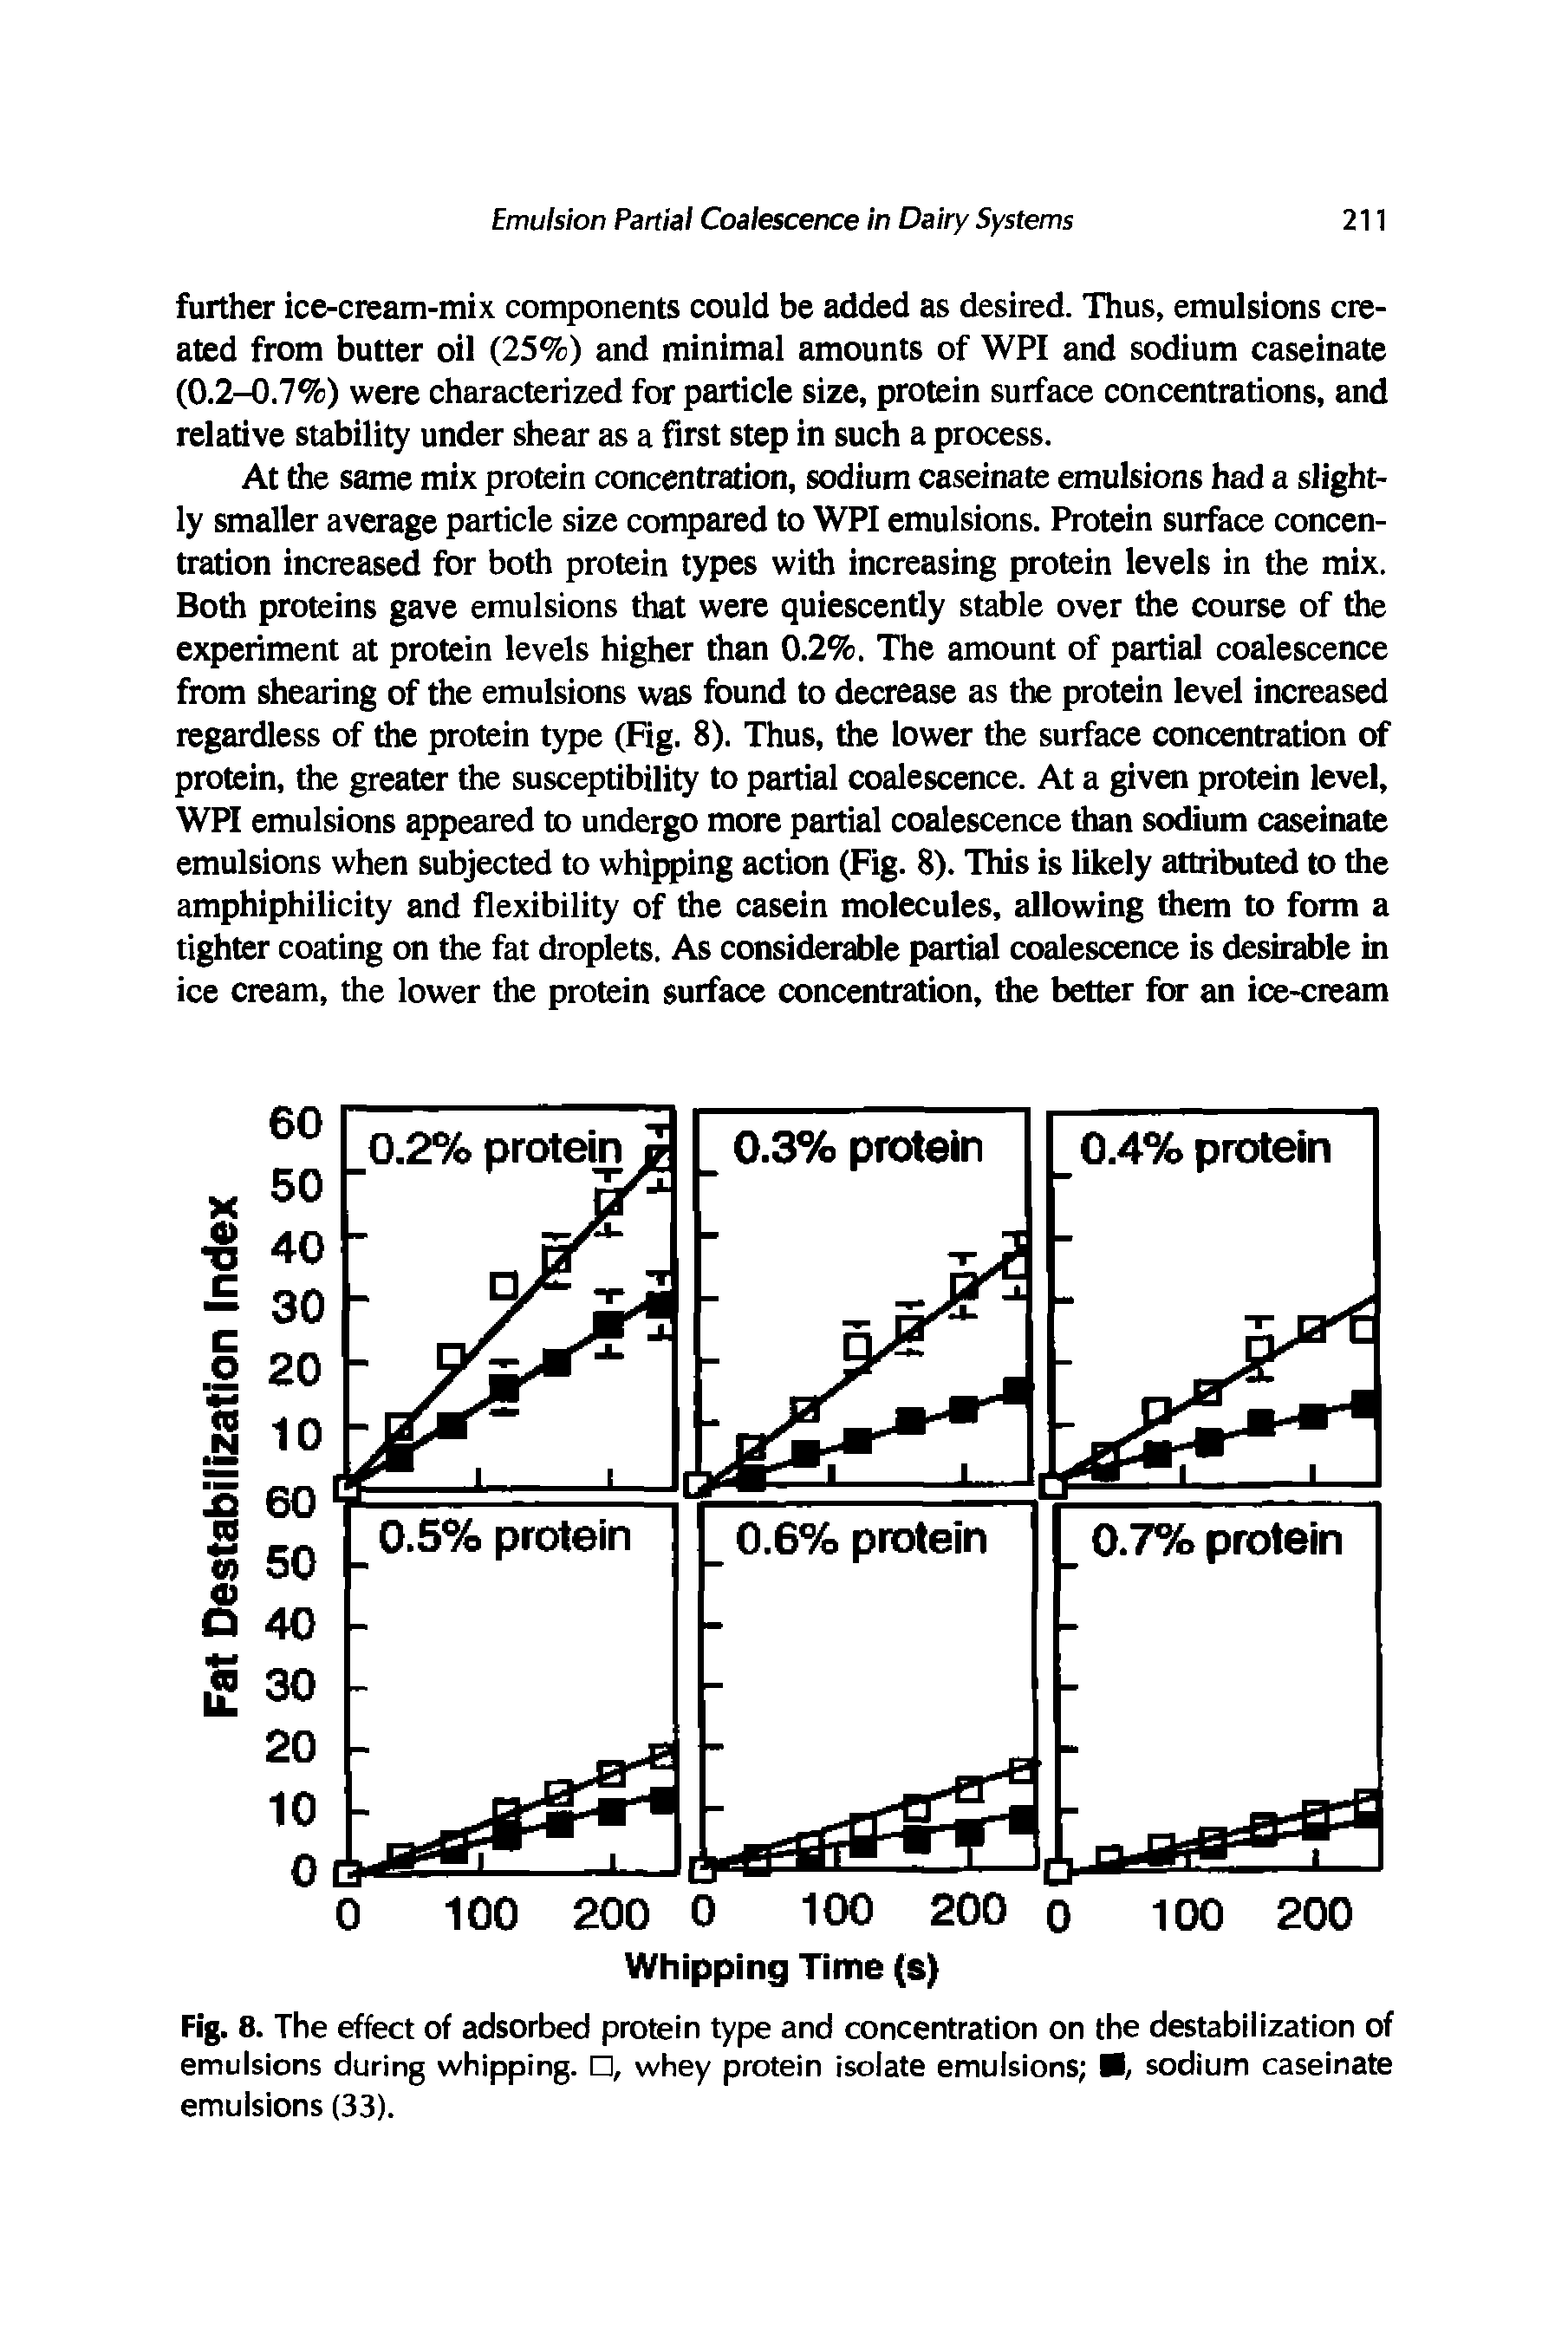 Fig. 8. The effect of adsorbed protein type and concentration on the destabilization of emulsions during whipping. , whey protein isolate emulsions , sodium caseinate emulsions (33).